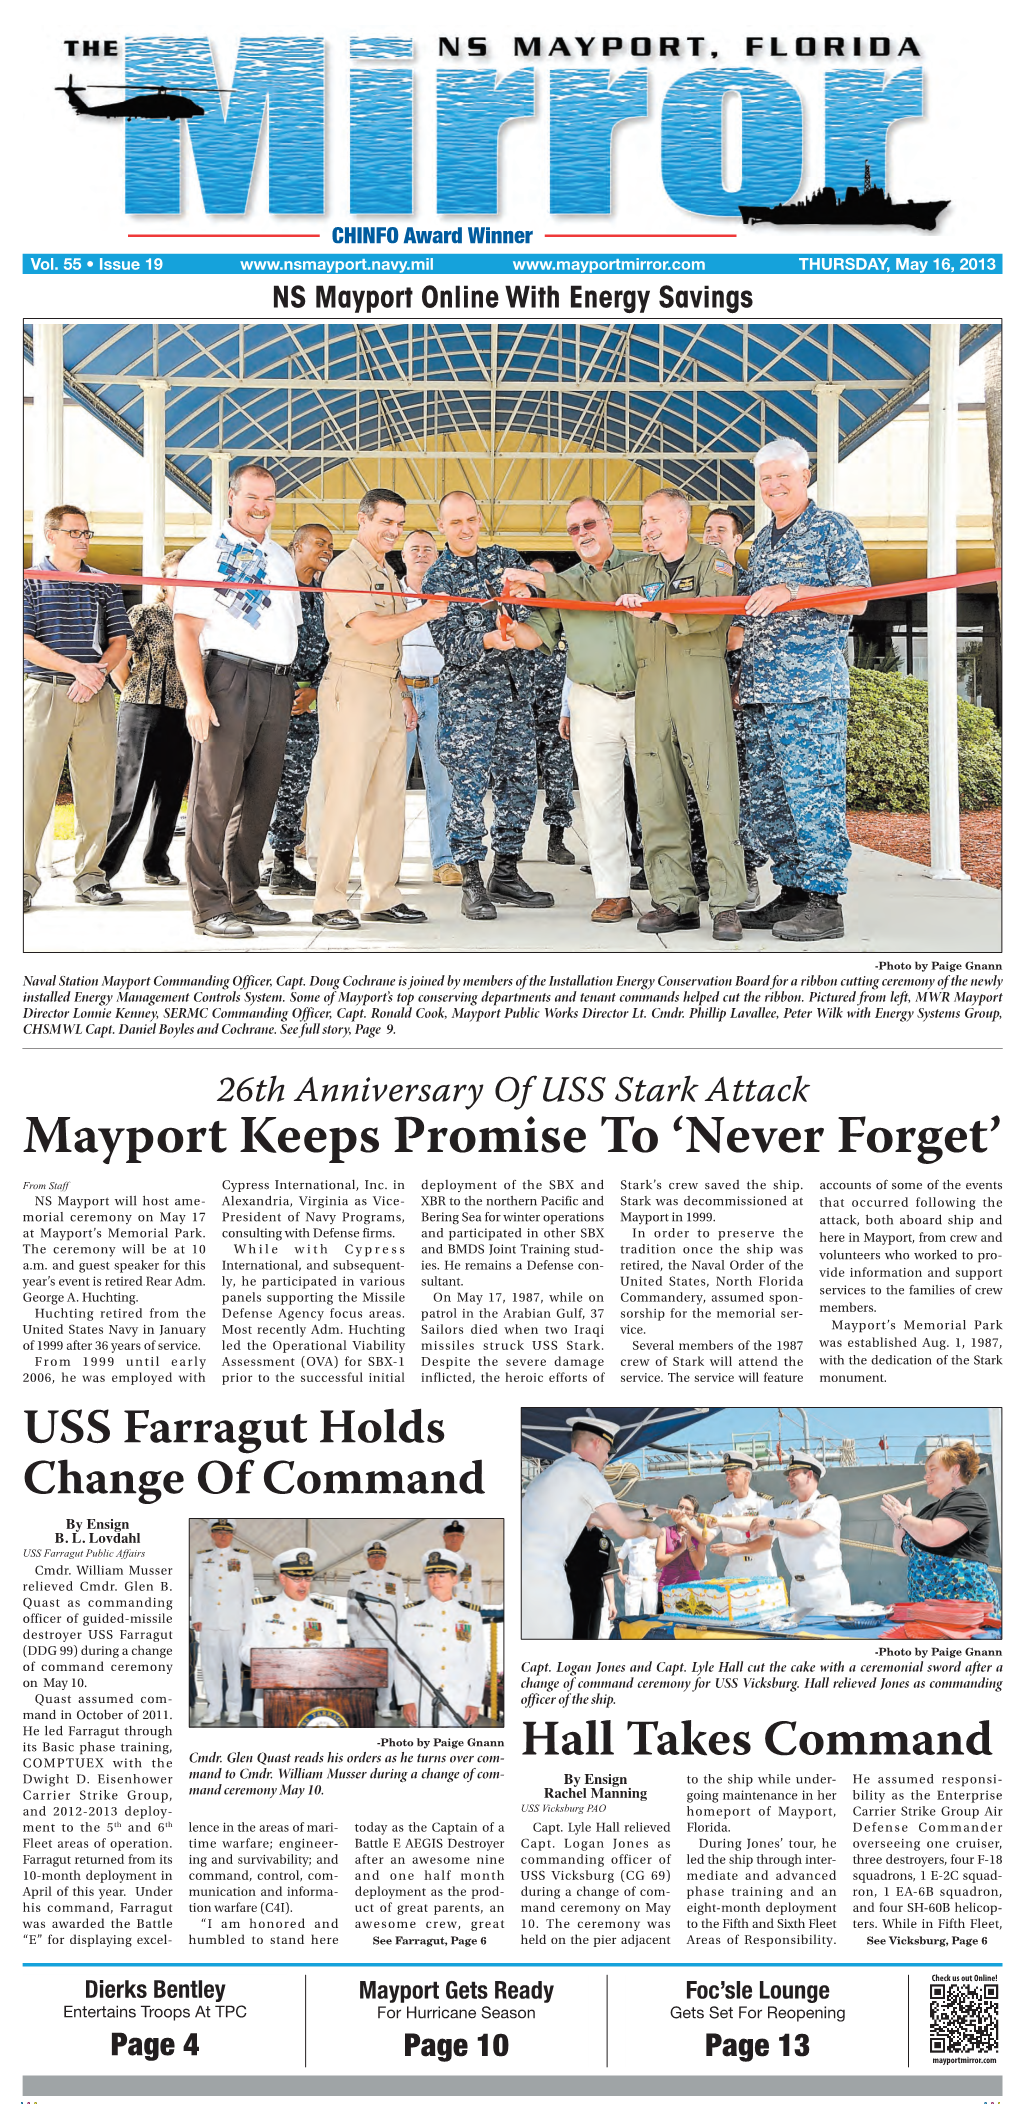 Mayport Keeps Promise to 'Never Forget'